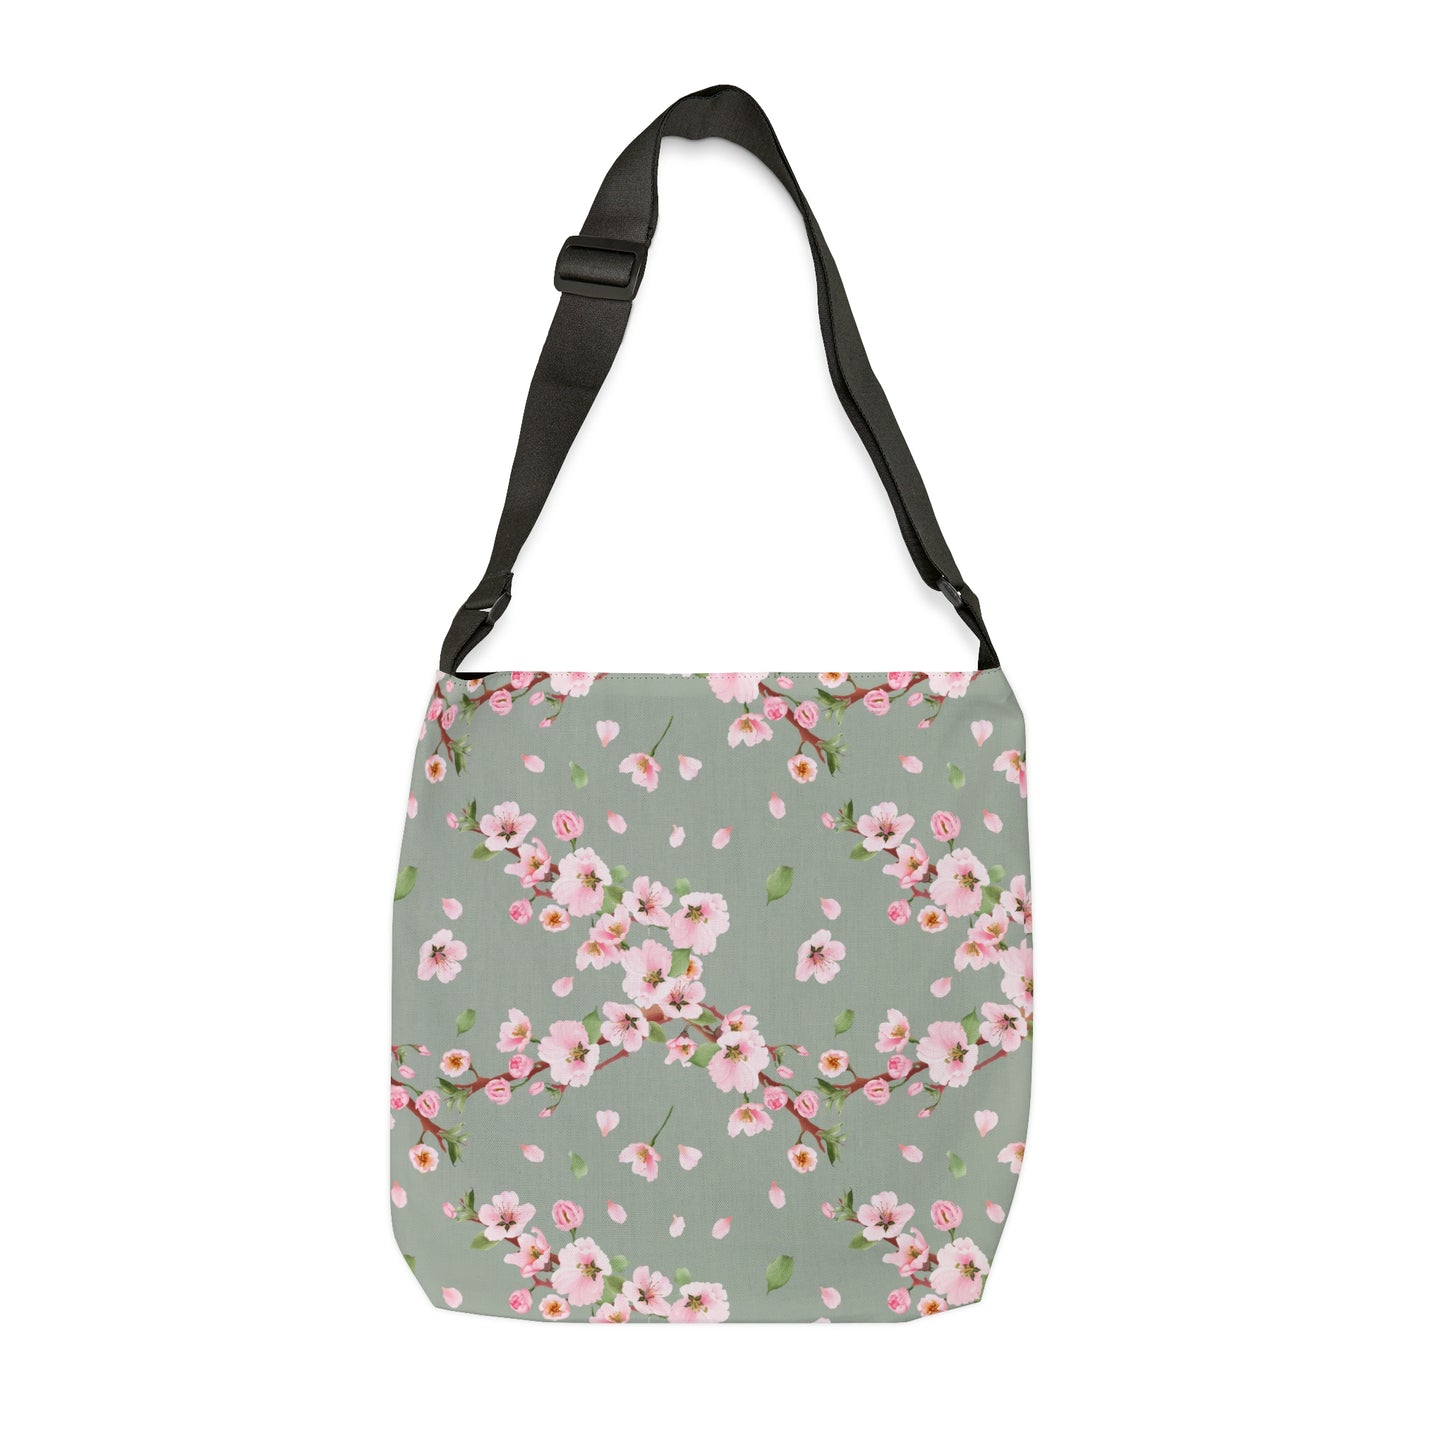 green tote bag or crossbody purse with pink cherry blossom print for women